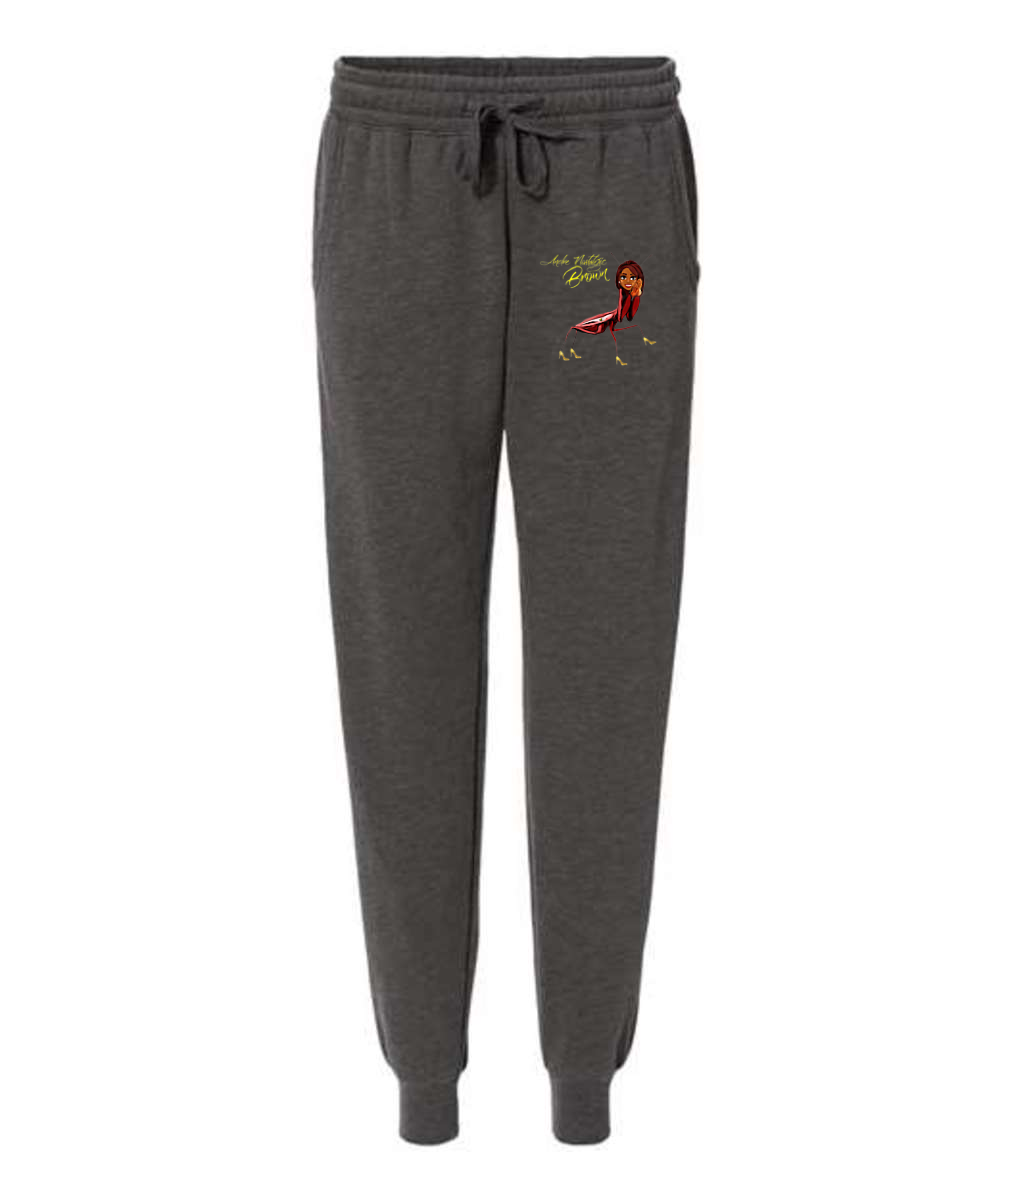 Blk Insct Famili Embroidered Independent Trading Co. - Women's California Wave Wash Sweatpants or Similar